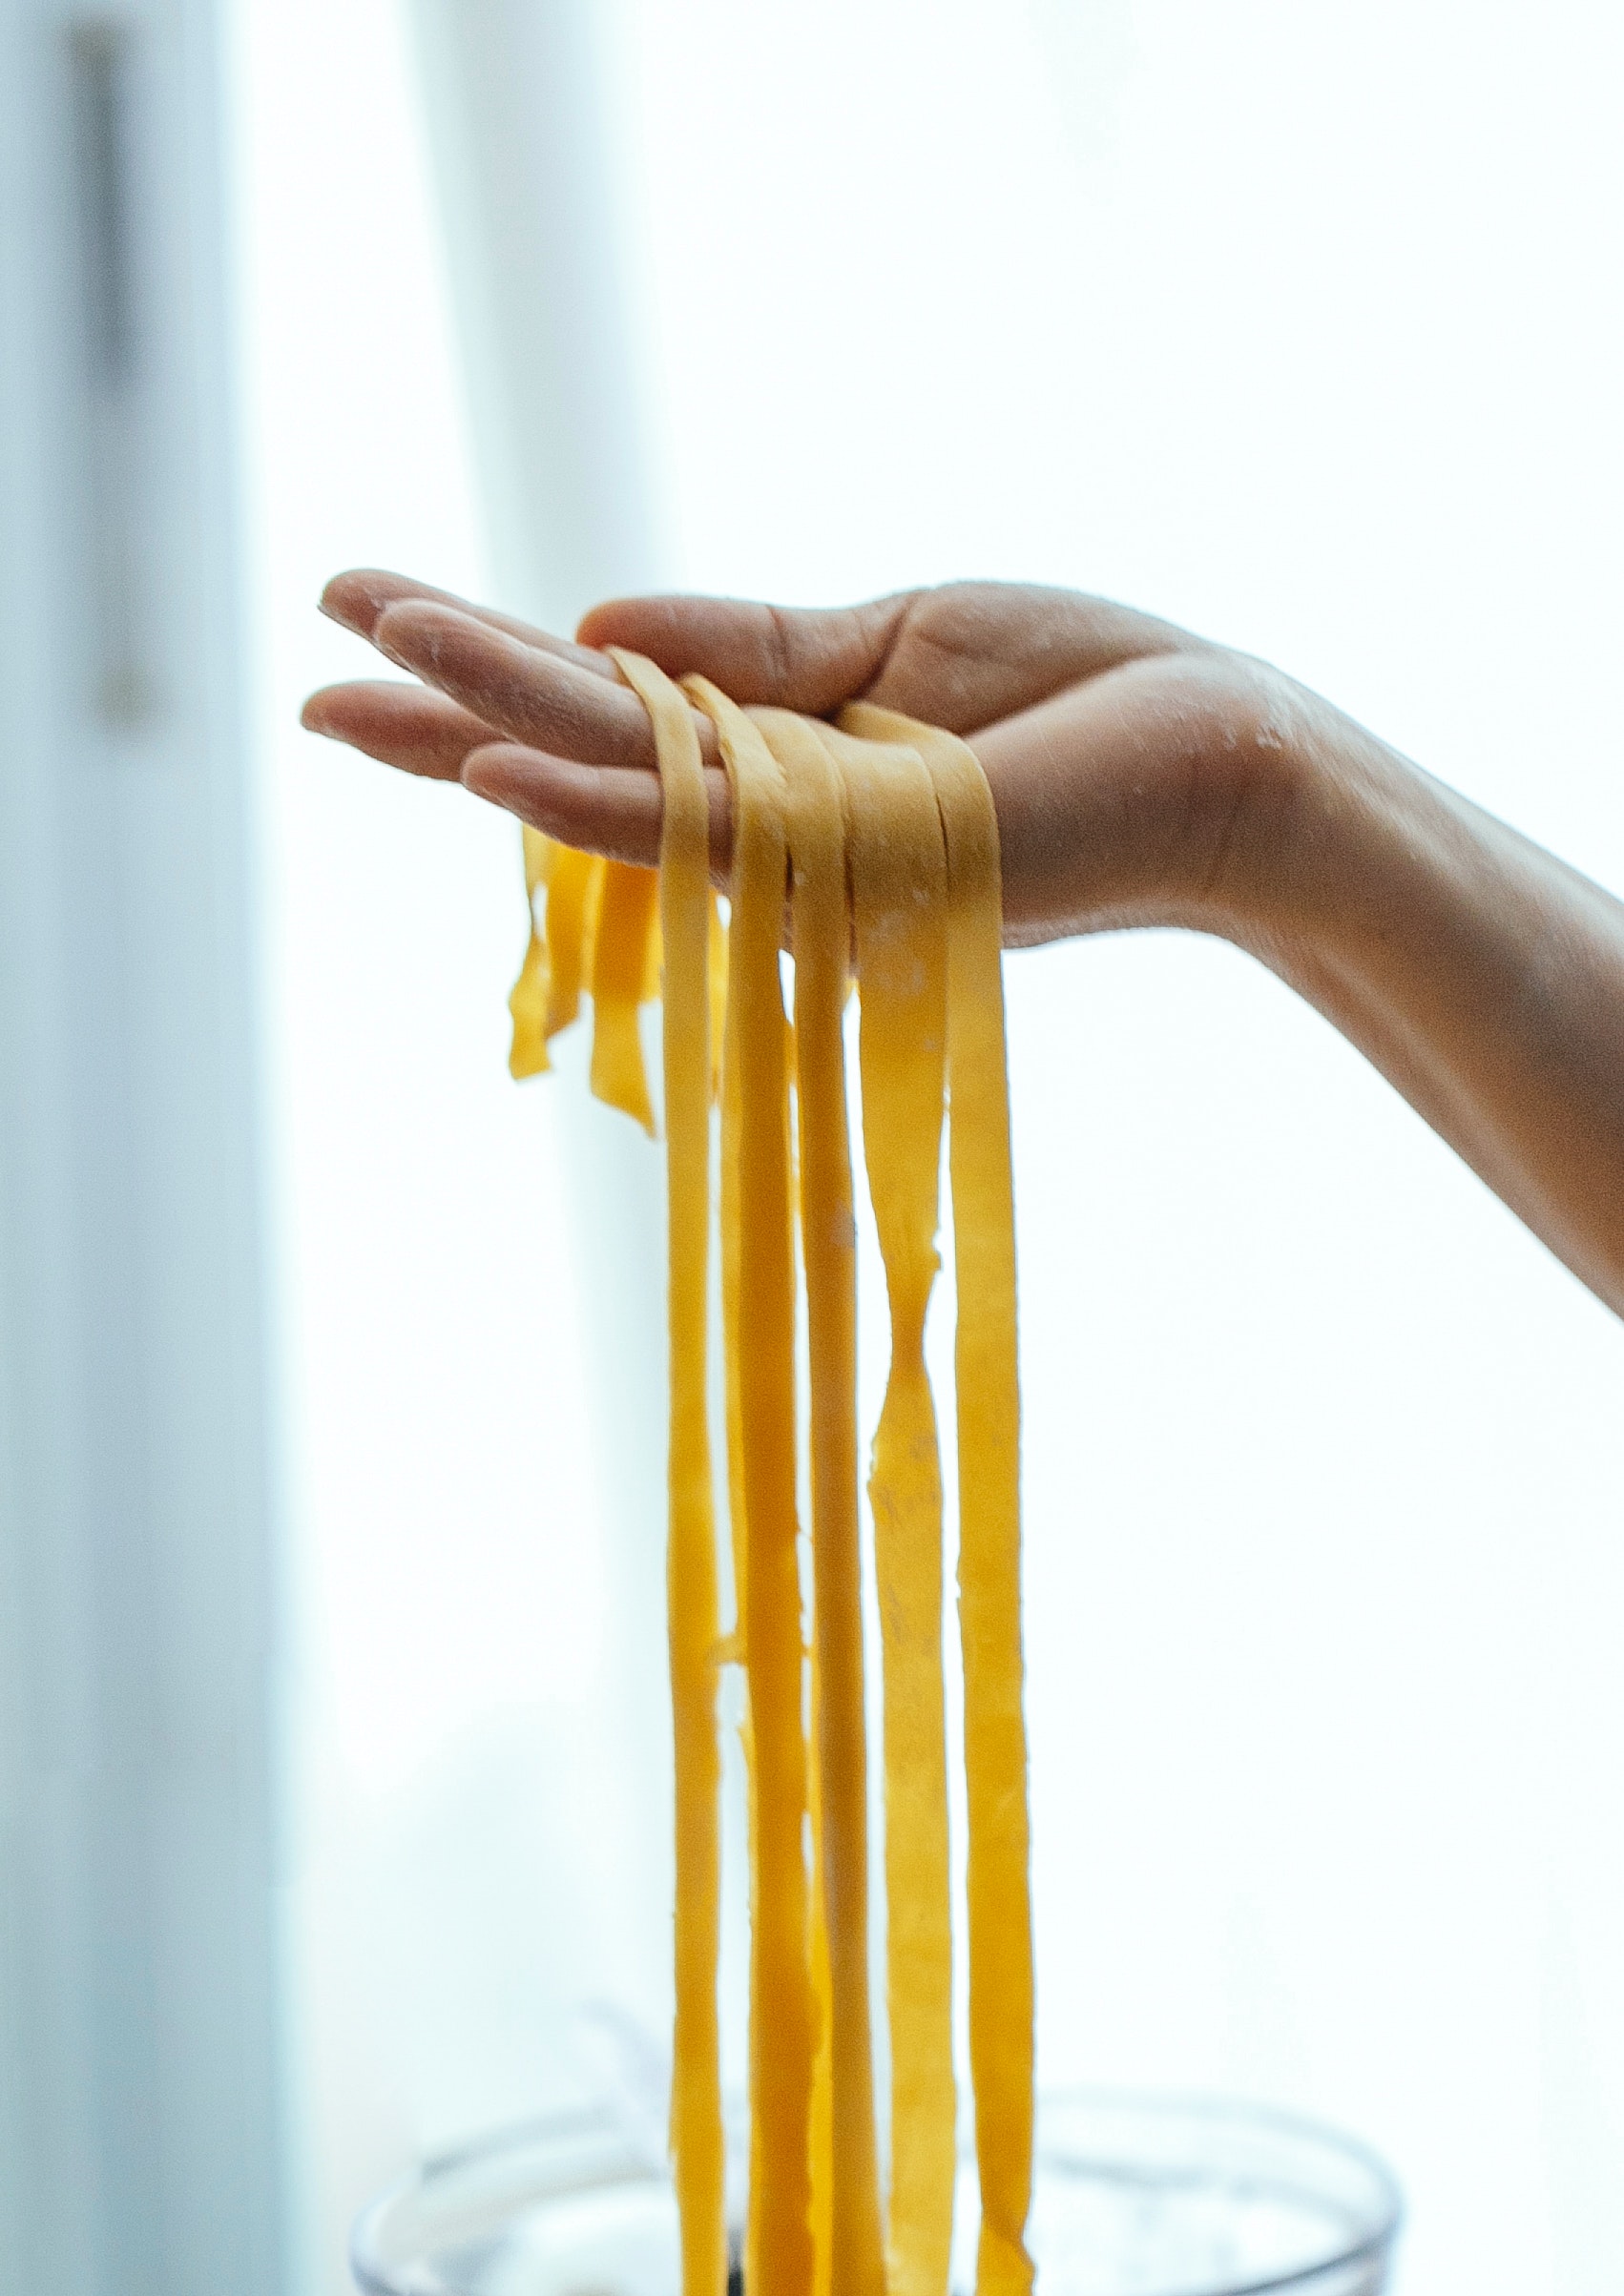 Discover New Possibilities with 7 Types of Pasta